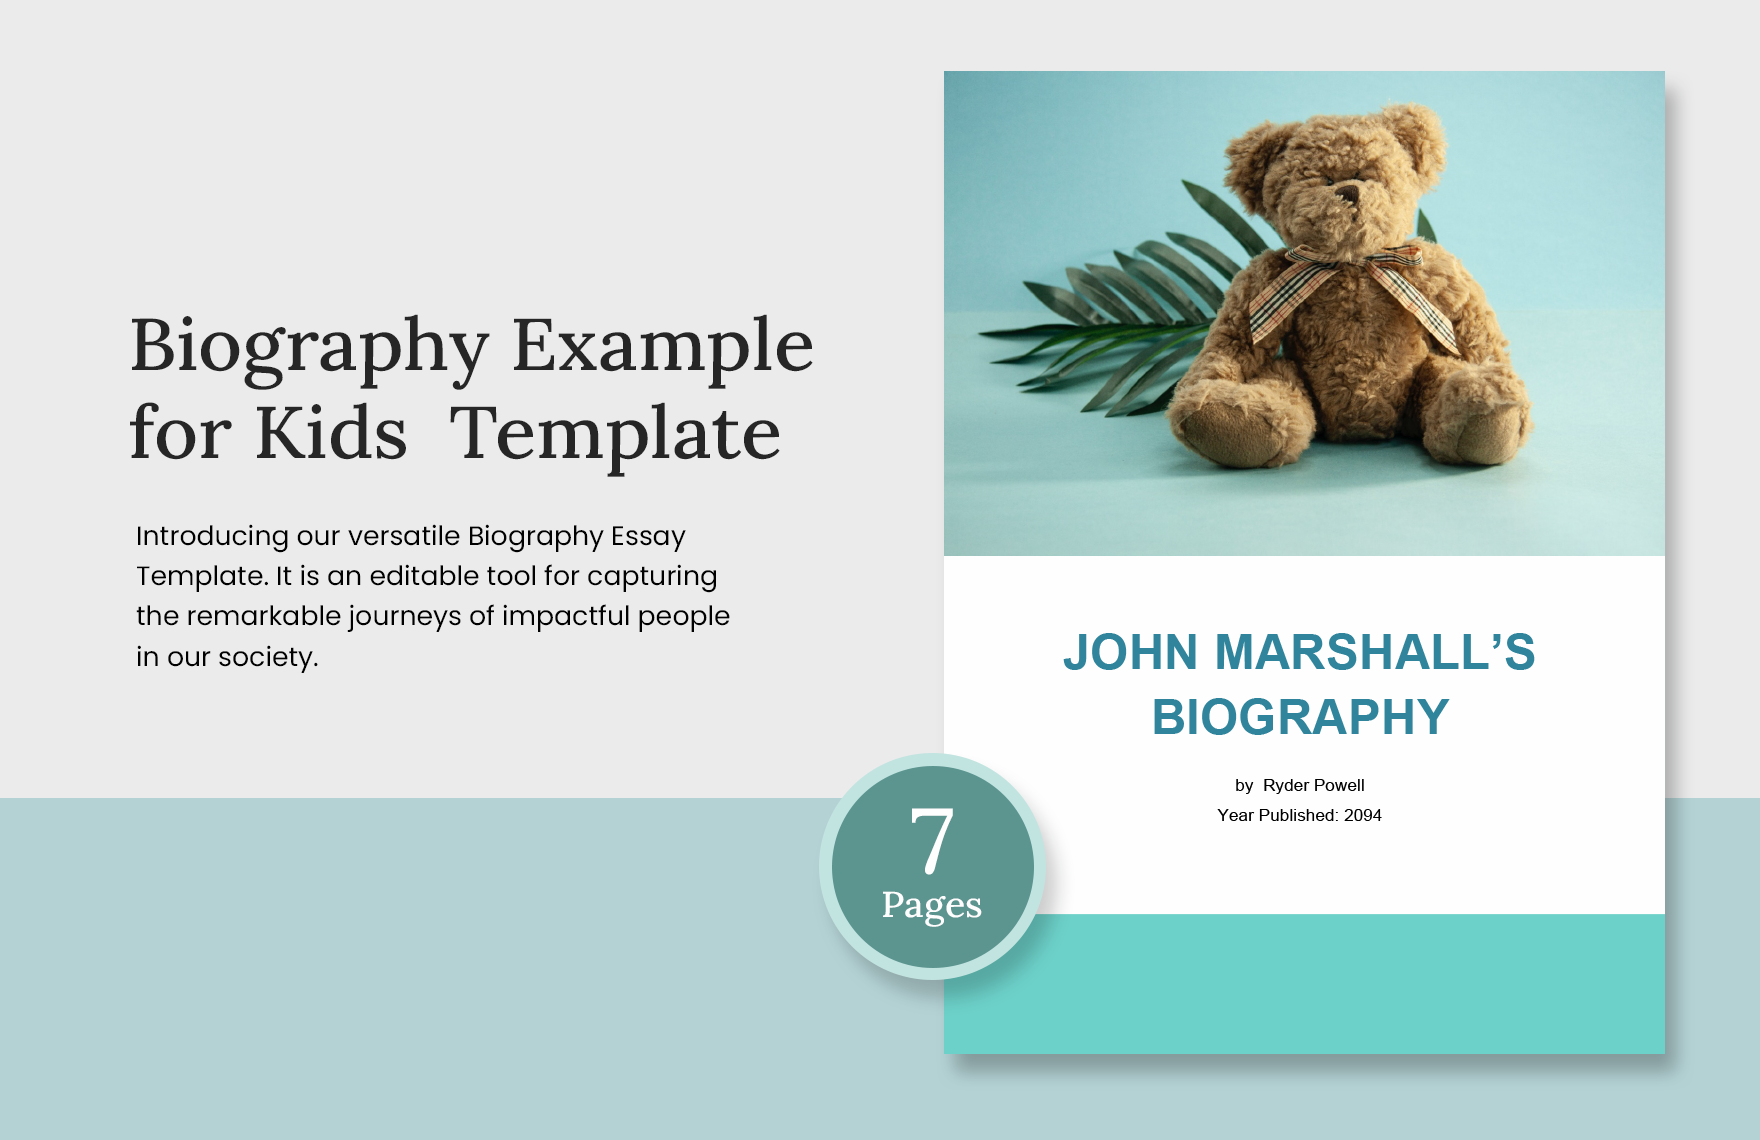 biography-example-for-kids